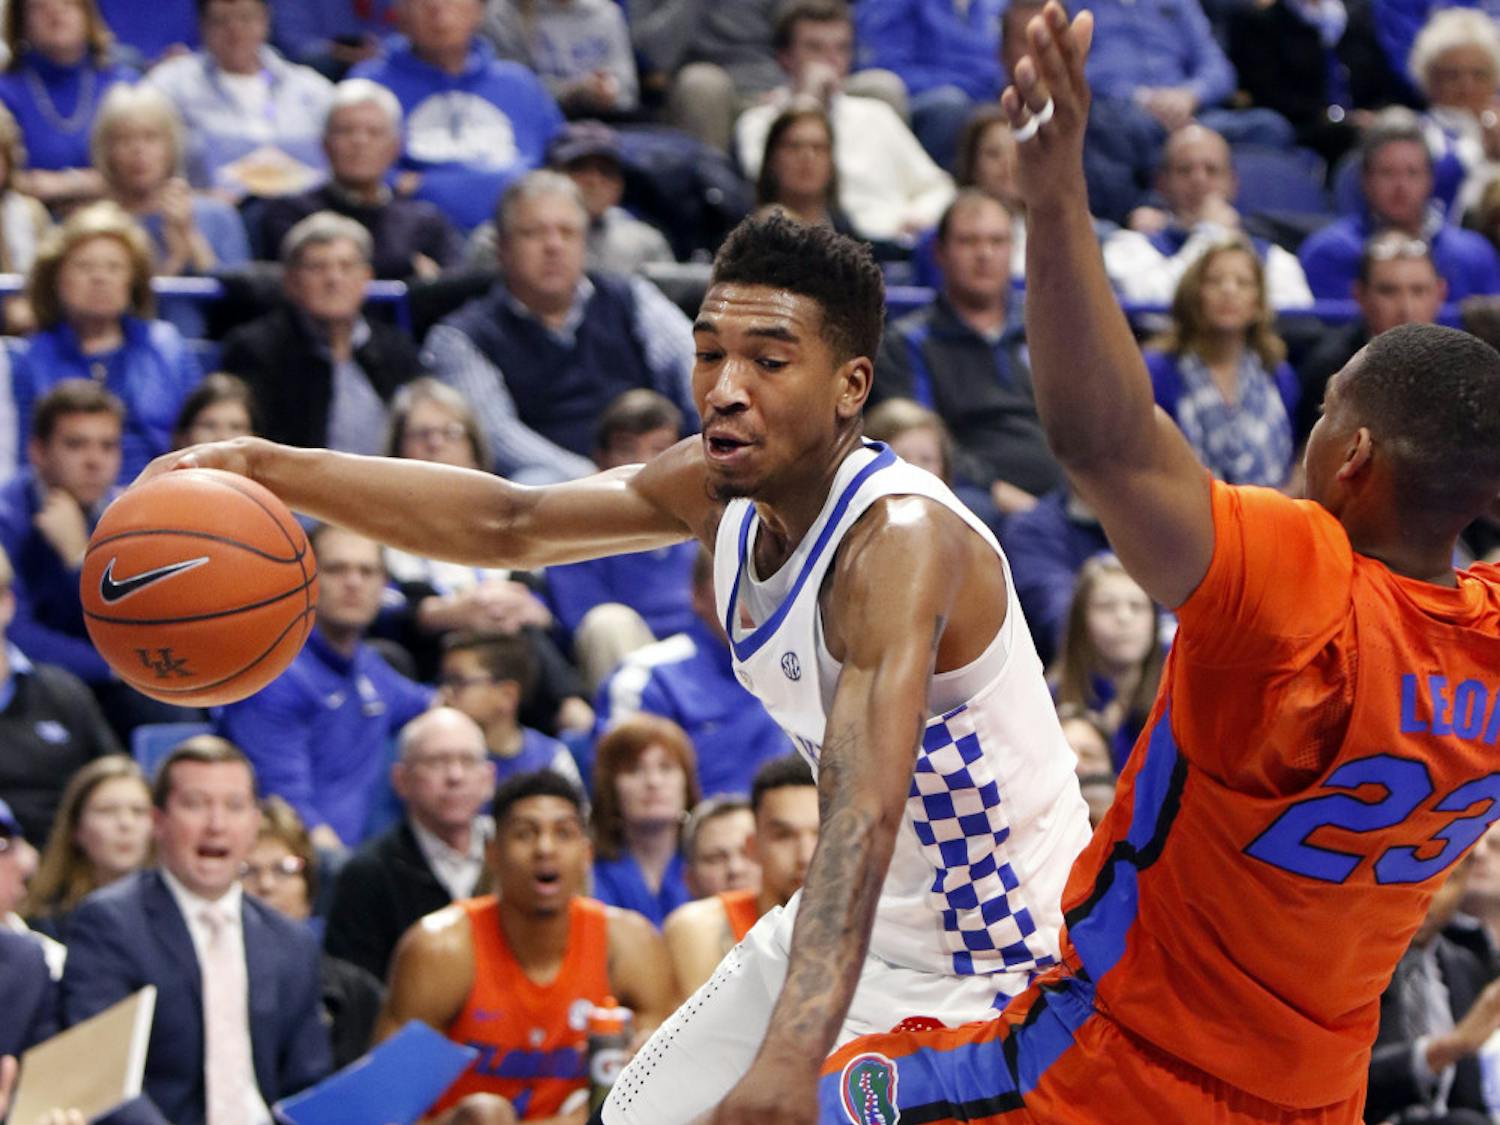 Kentucky's Malik Monk, left, looks for an opening on Florida's Justin Leon during the first half of an NCAA college basketball game, Saturday, Feb. 25, 2017, in Lexington, Ky. (AP Photo/James Crisp)